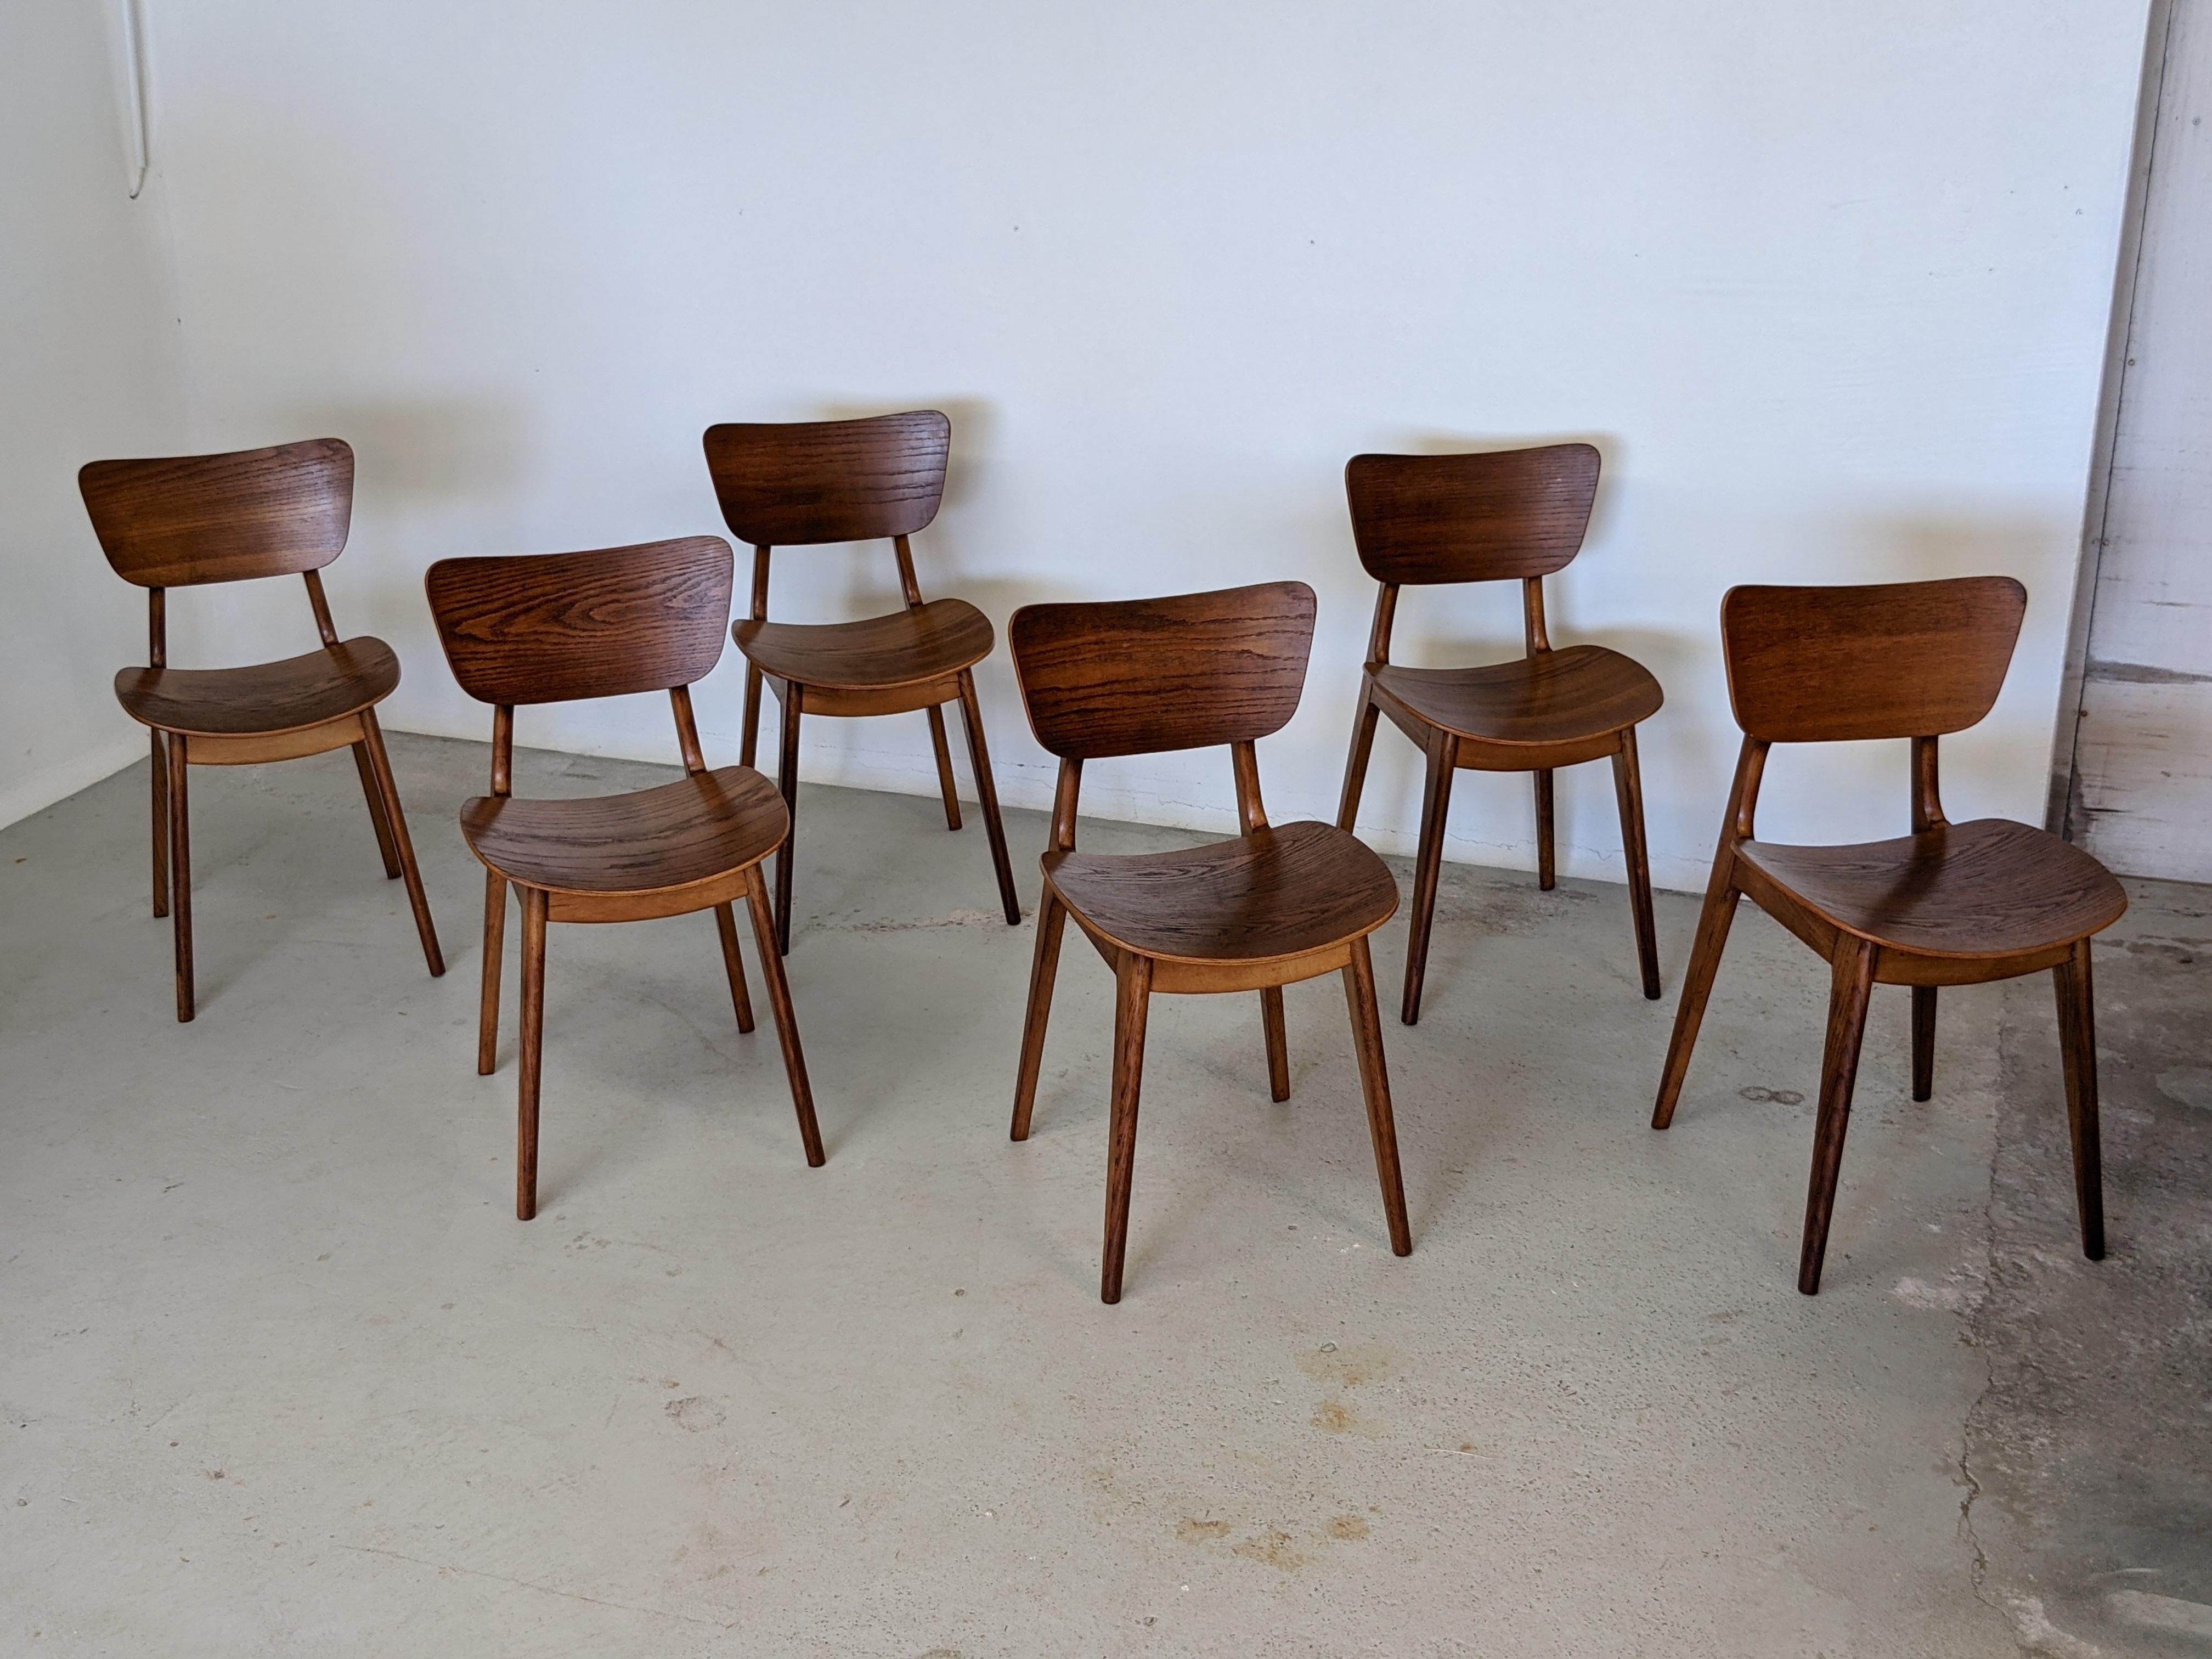 French Mid Century Set of Six Oak Wood Dining Chairs by Roger Landault, France, 1950s